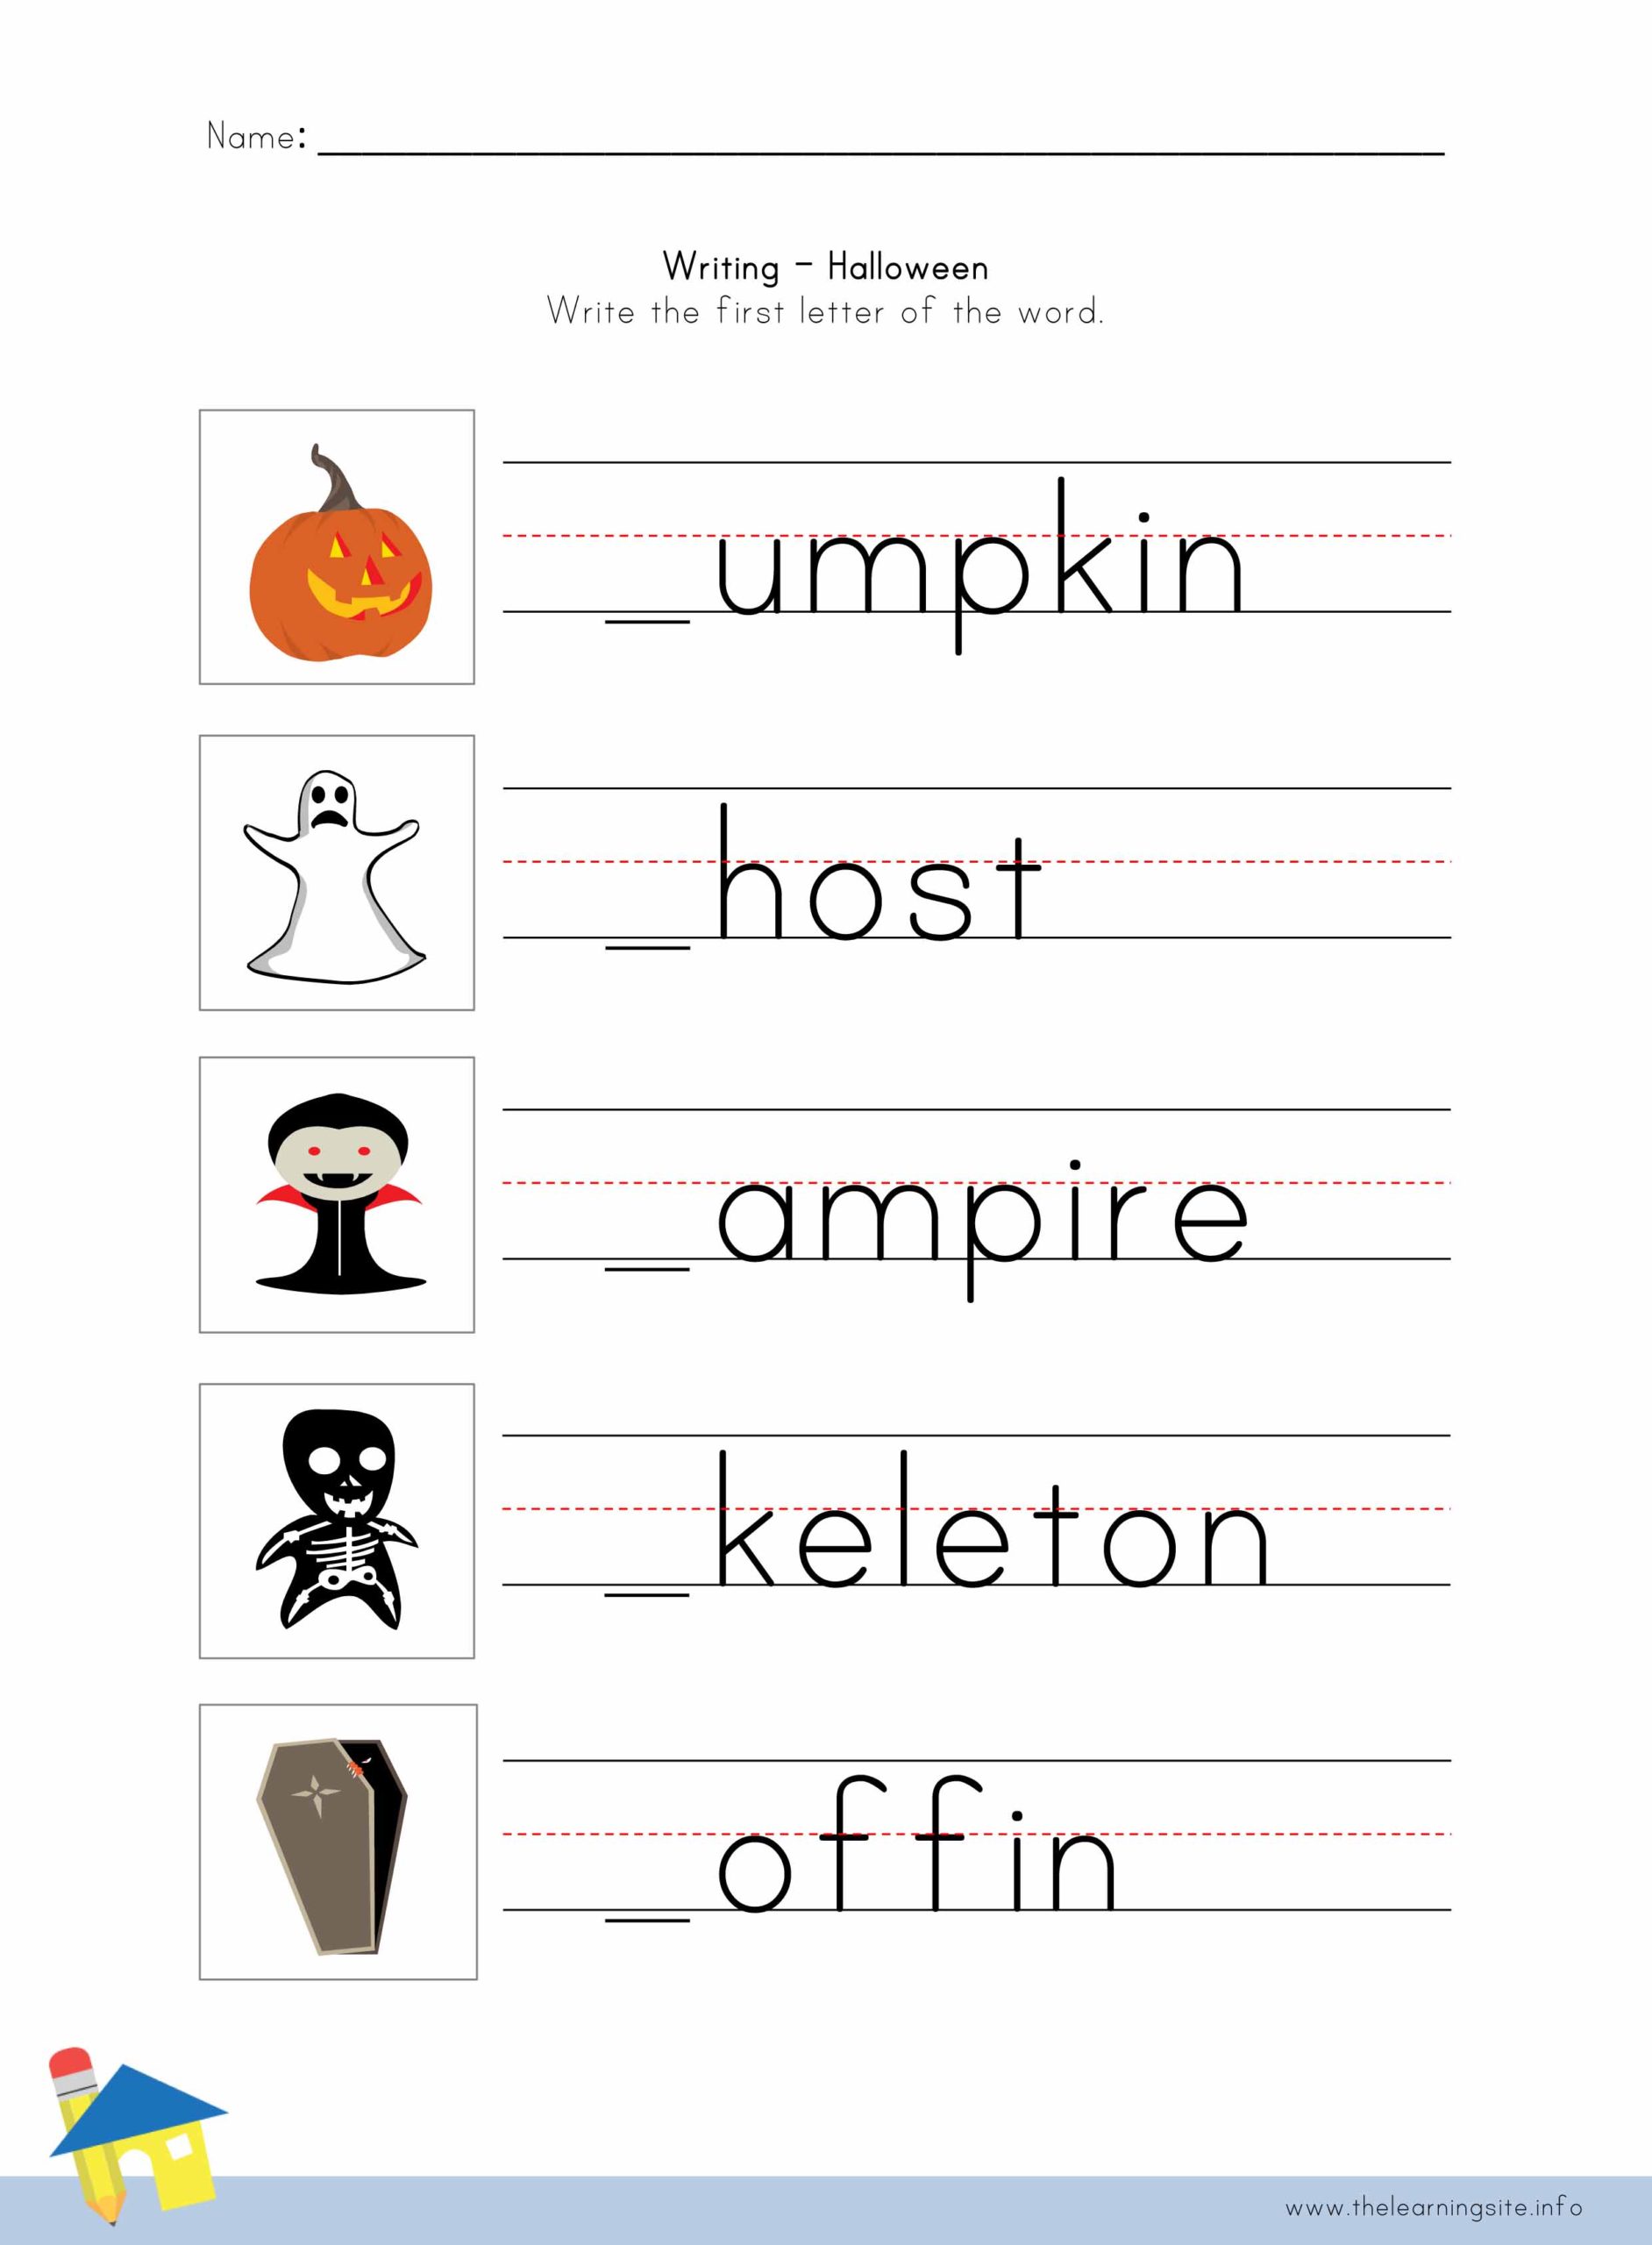 halloween-writing-worksheet-1-the-learning-site